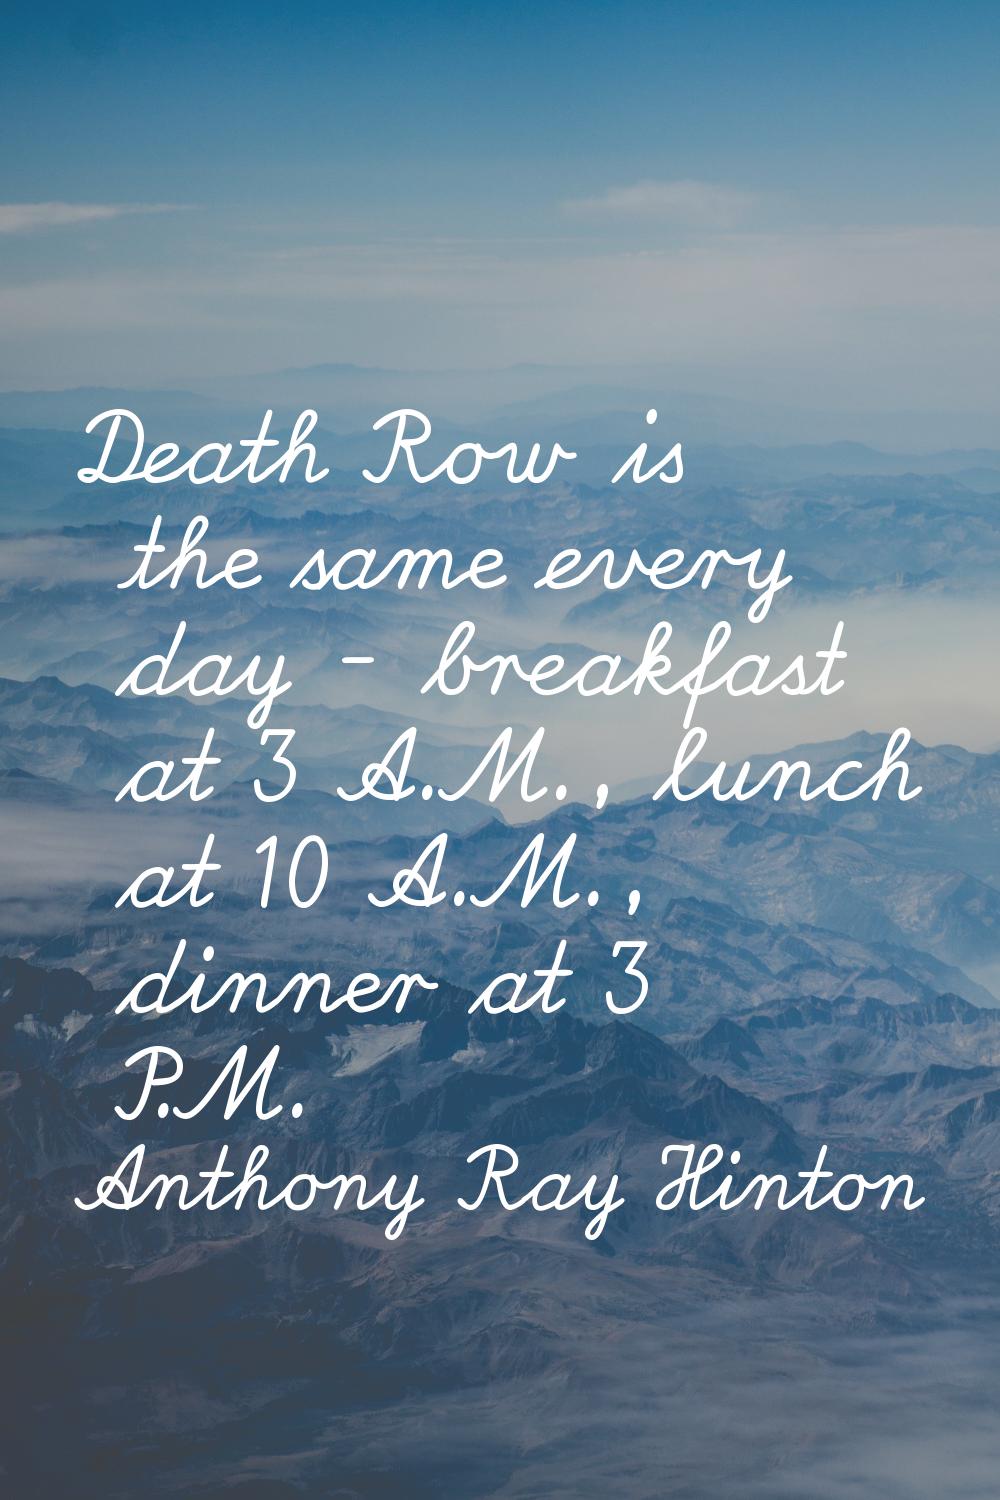 Death Row is the same every day - breakfast at 3 A.M., lunch at 10 A.M., dinner at 3 P.M.